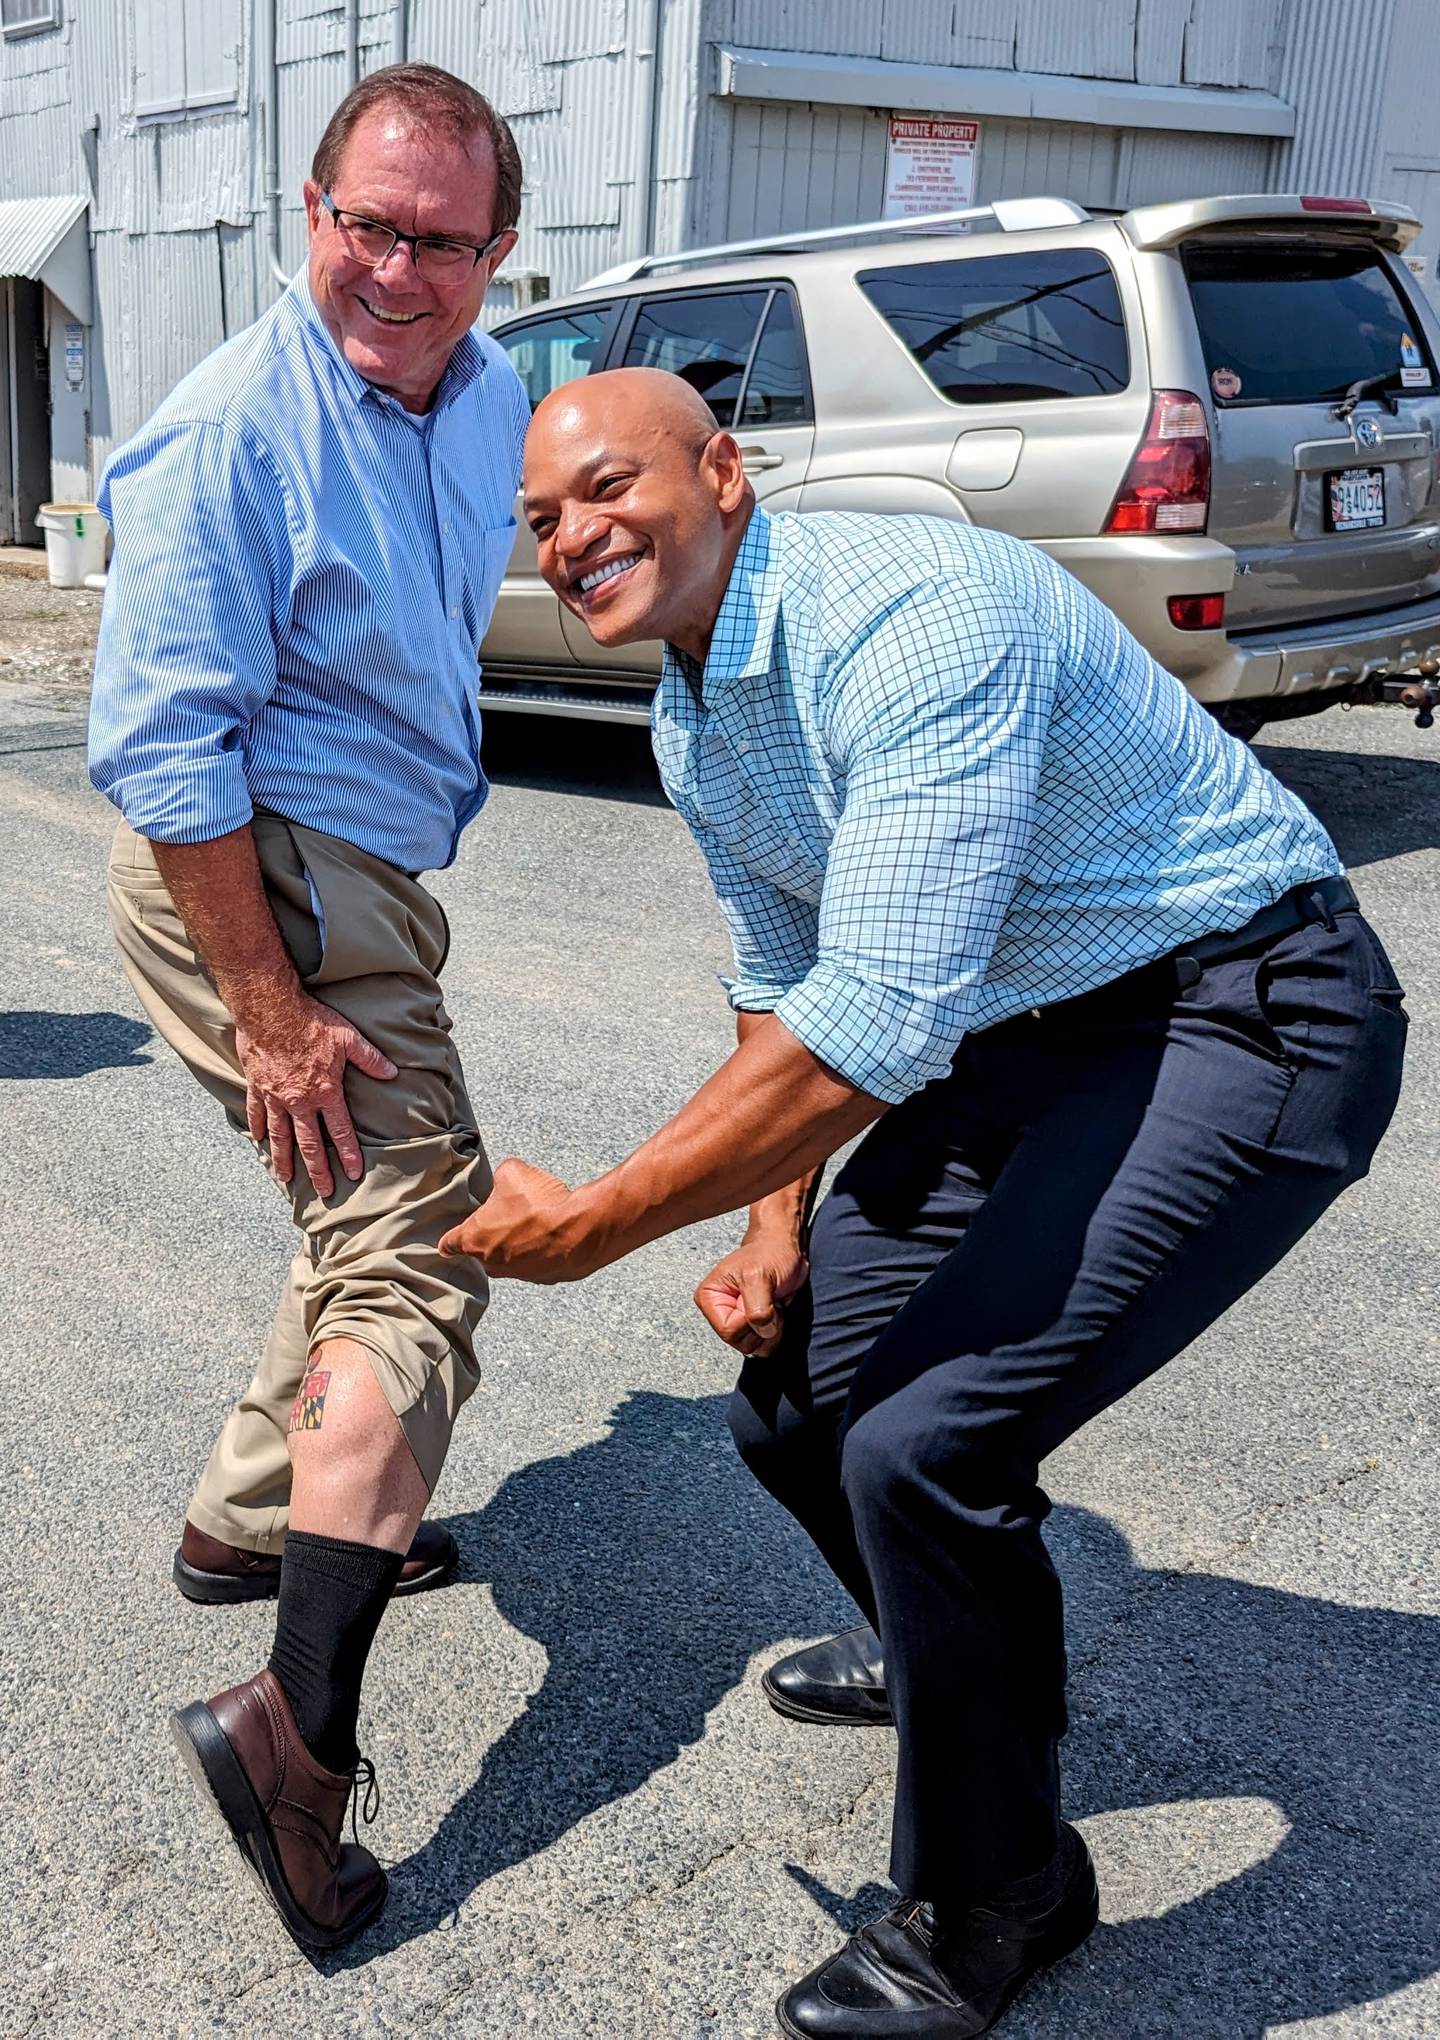 Gov. Wes Moore, left, poses for a photo with state Del. Tom Hutchinson after the Republican from Cambridge showed off the tattoo he got to celebrate completing a local Ironman competition. The governor was visiting a seafood processing plant in Cambridge on Thursday, July 20, 2023.